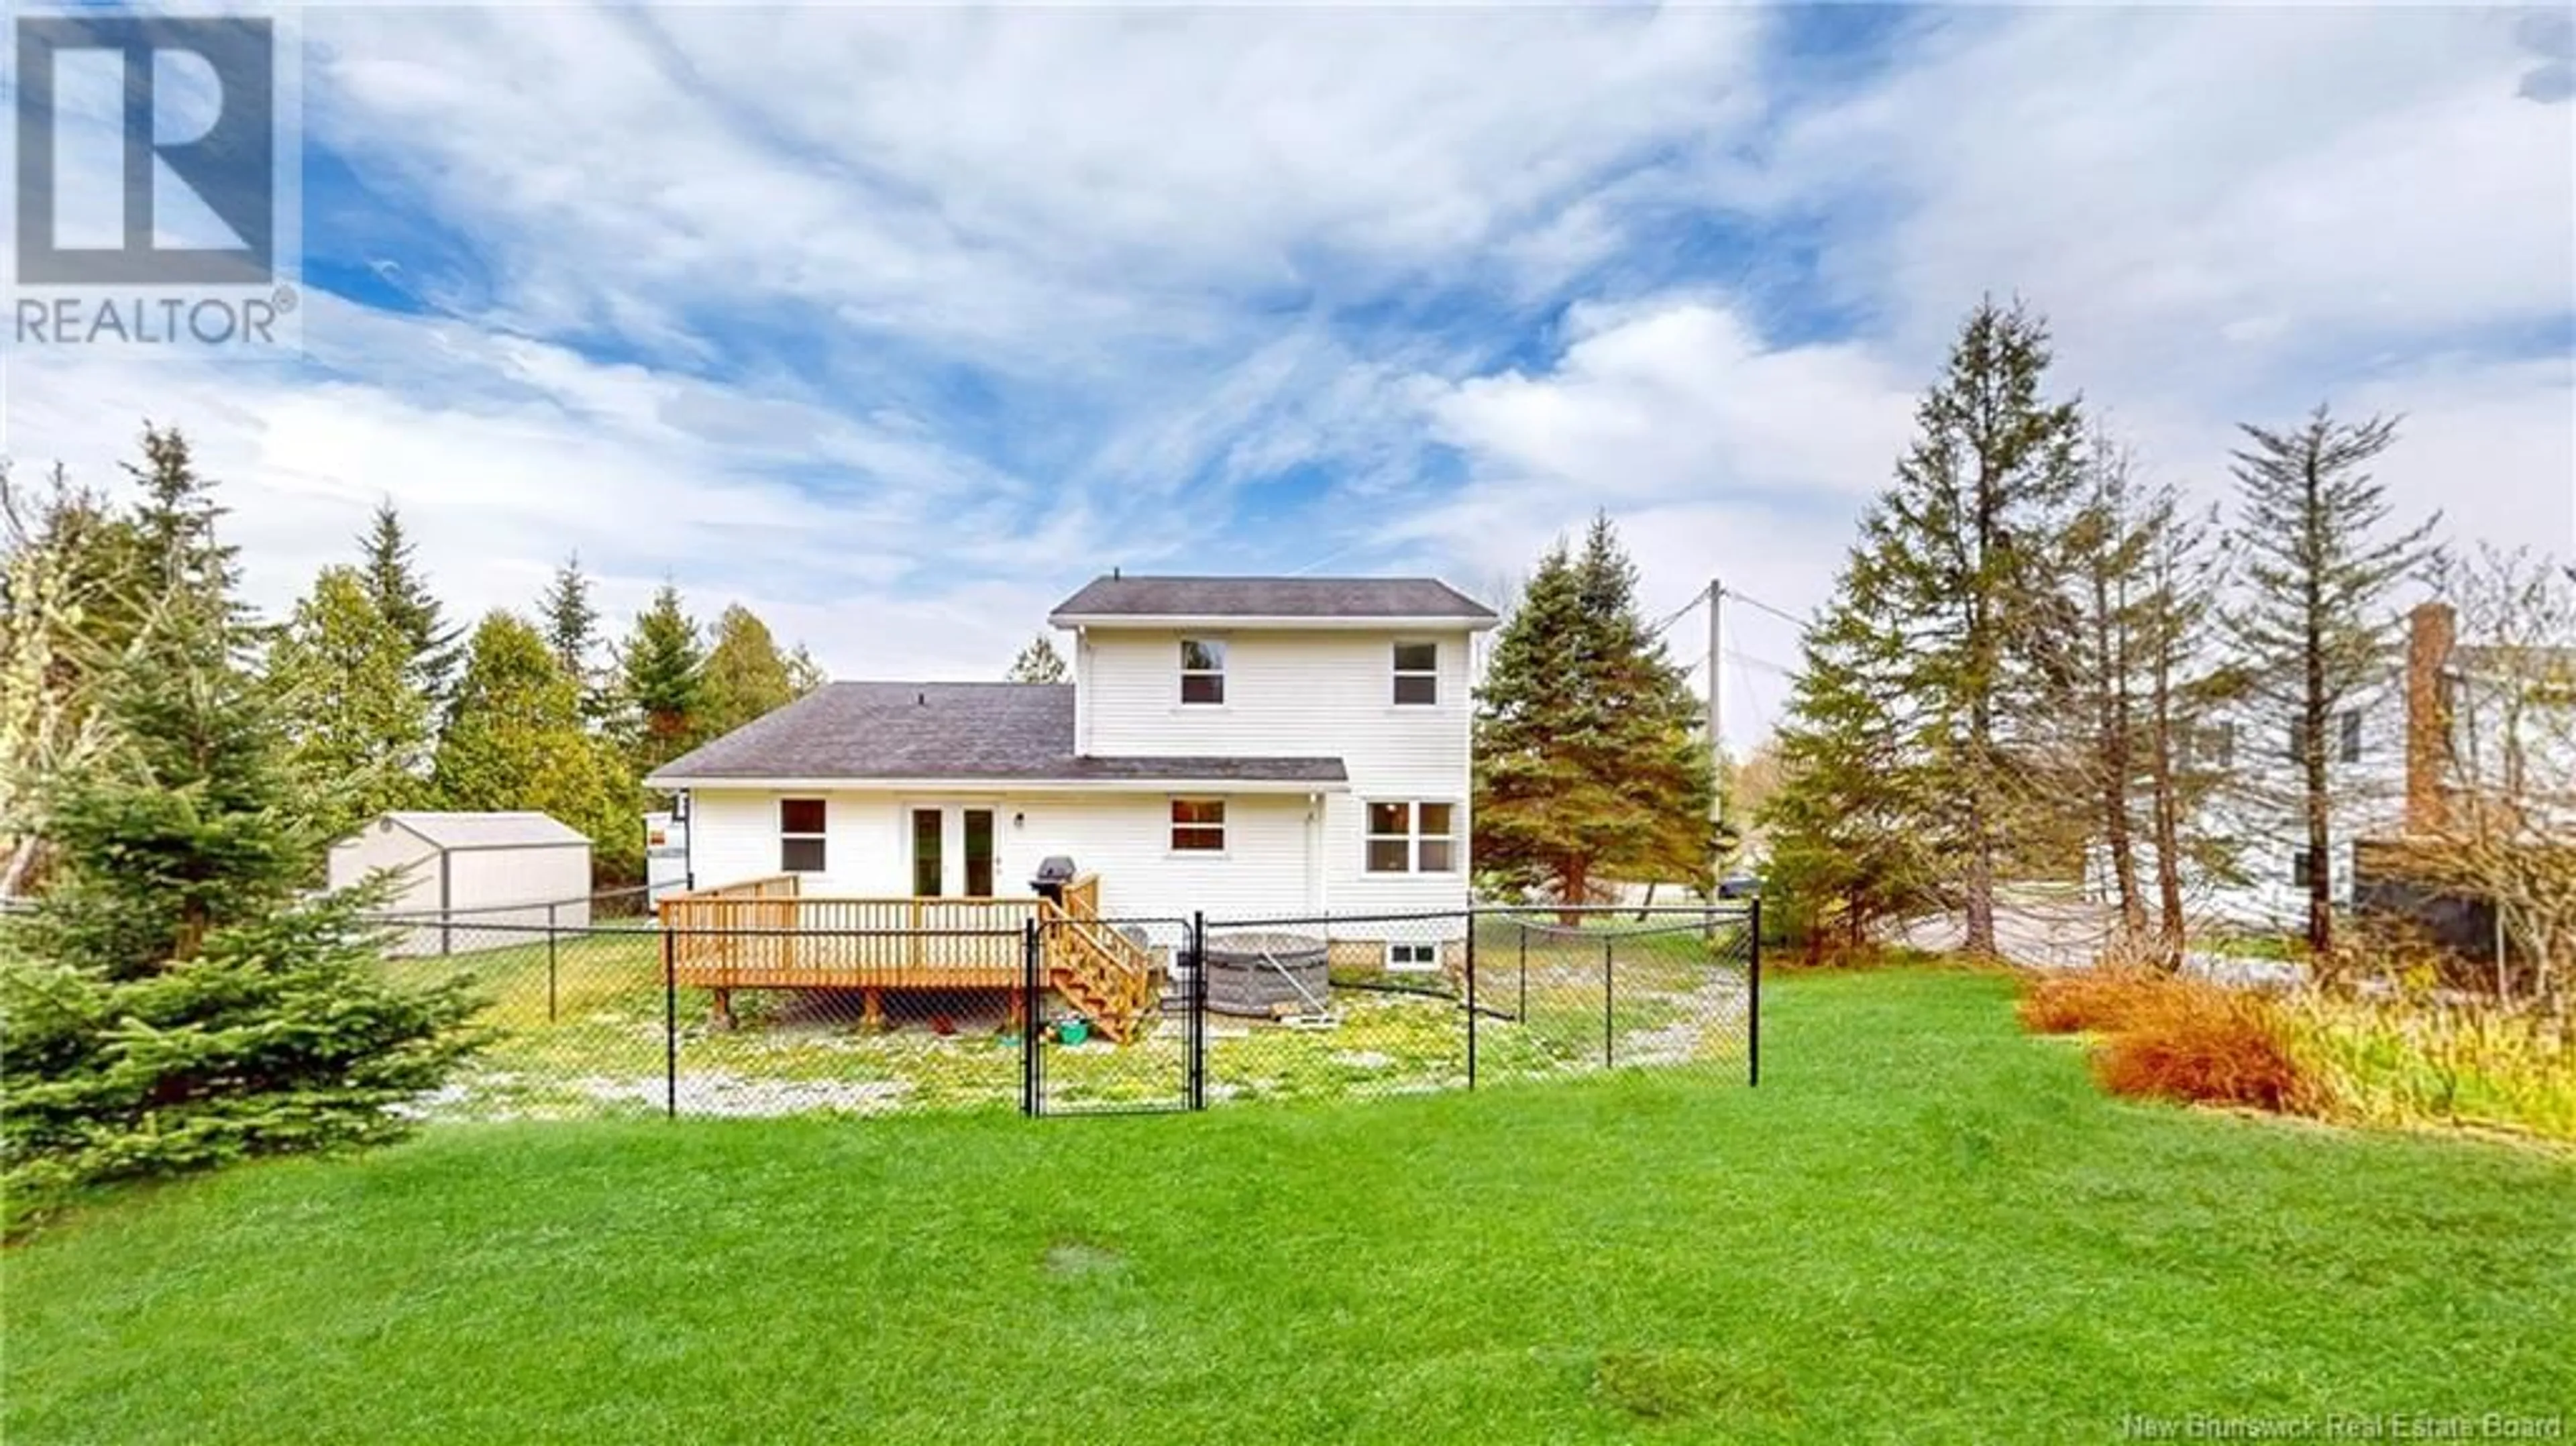 Fenced yard for 8 Southwood Drive, Quispamsis New Brunswick E2E4Y6